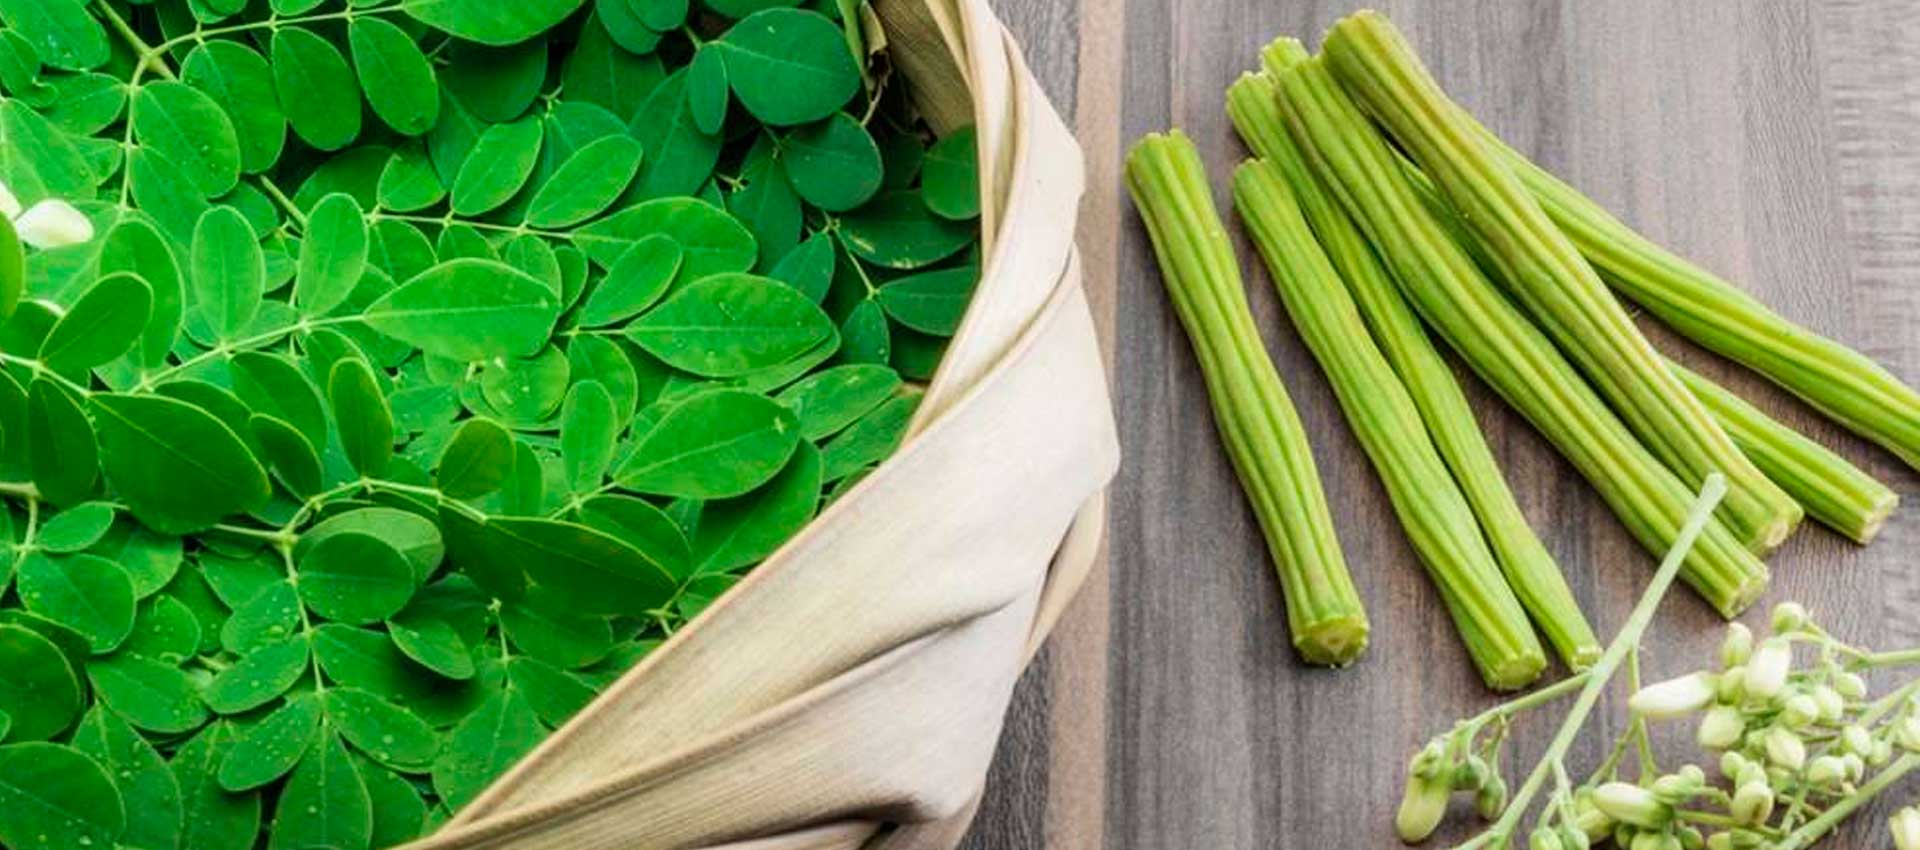 15 Health Benefits Of Moringa In Pakistan - Hair Growth, Weight Loss And More!